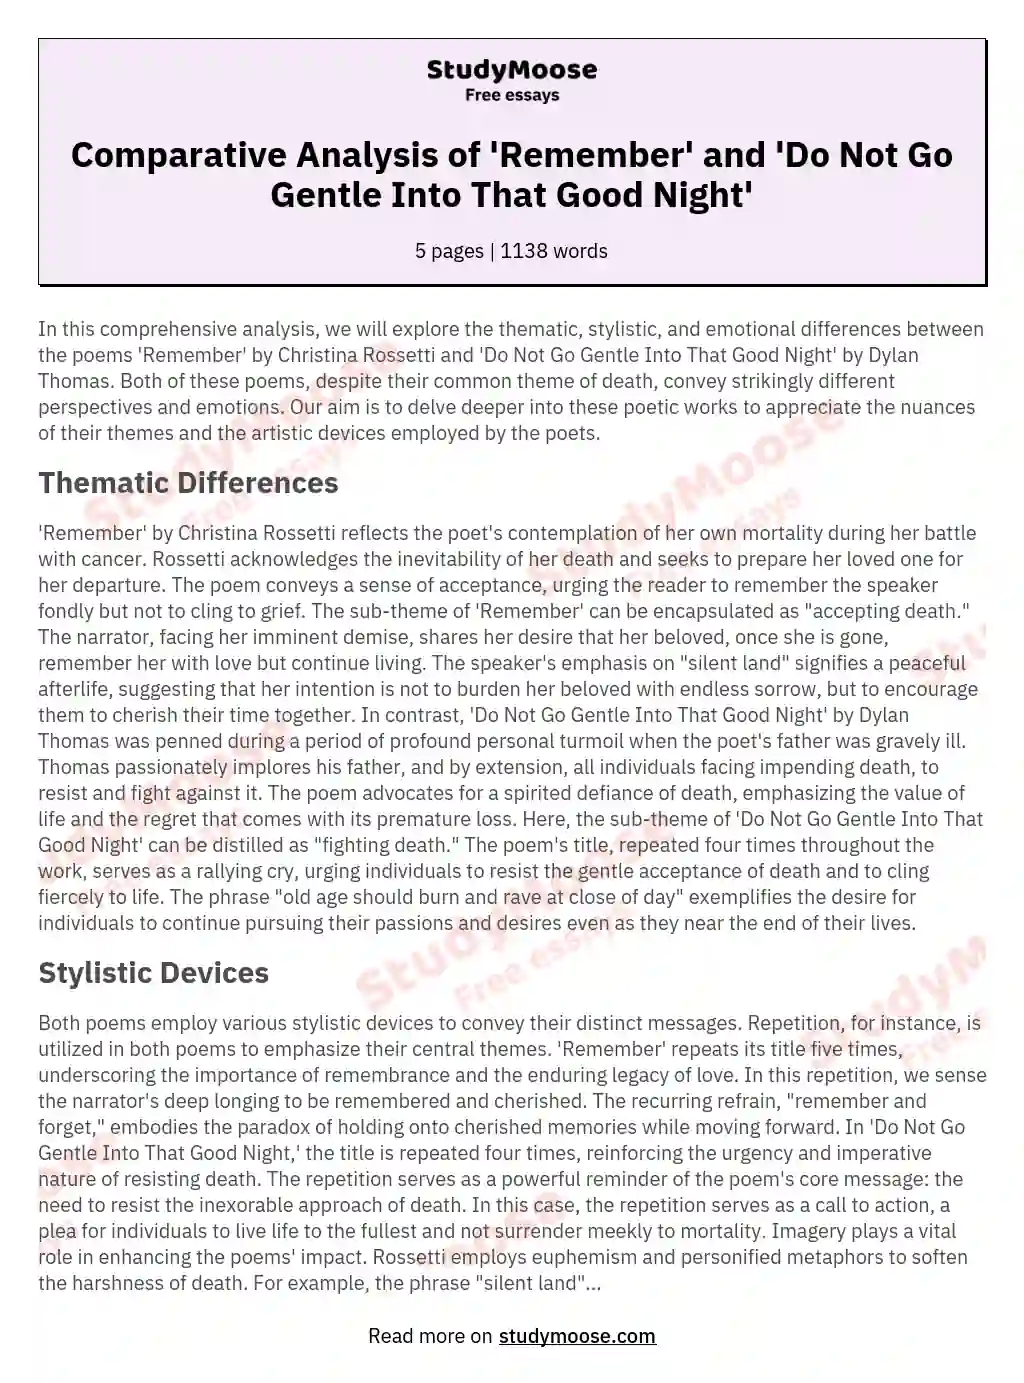 Comparative Analysis of 'Remember' and 'Do Not Go Gentle Into That Good Night' essay